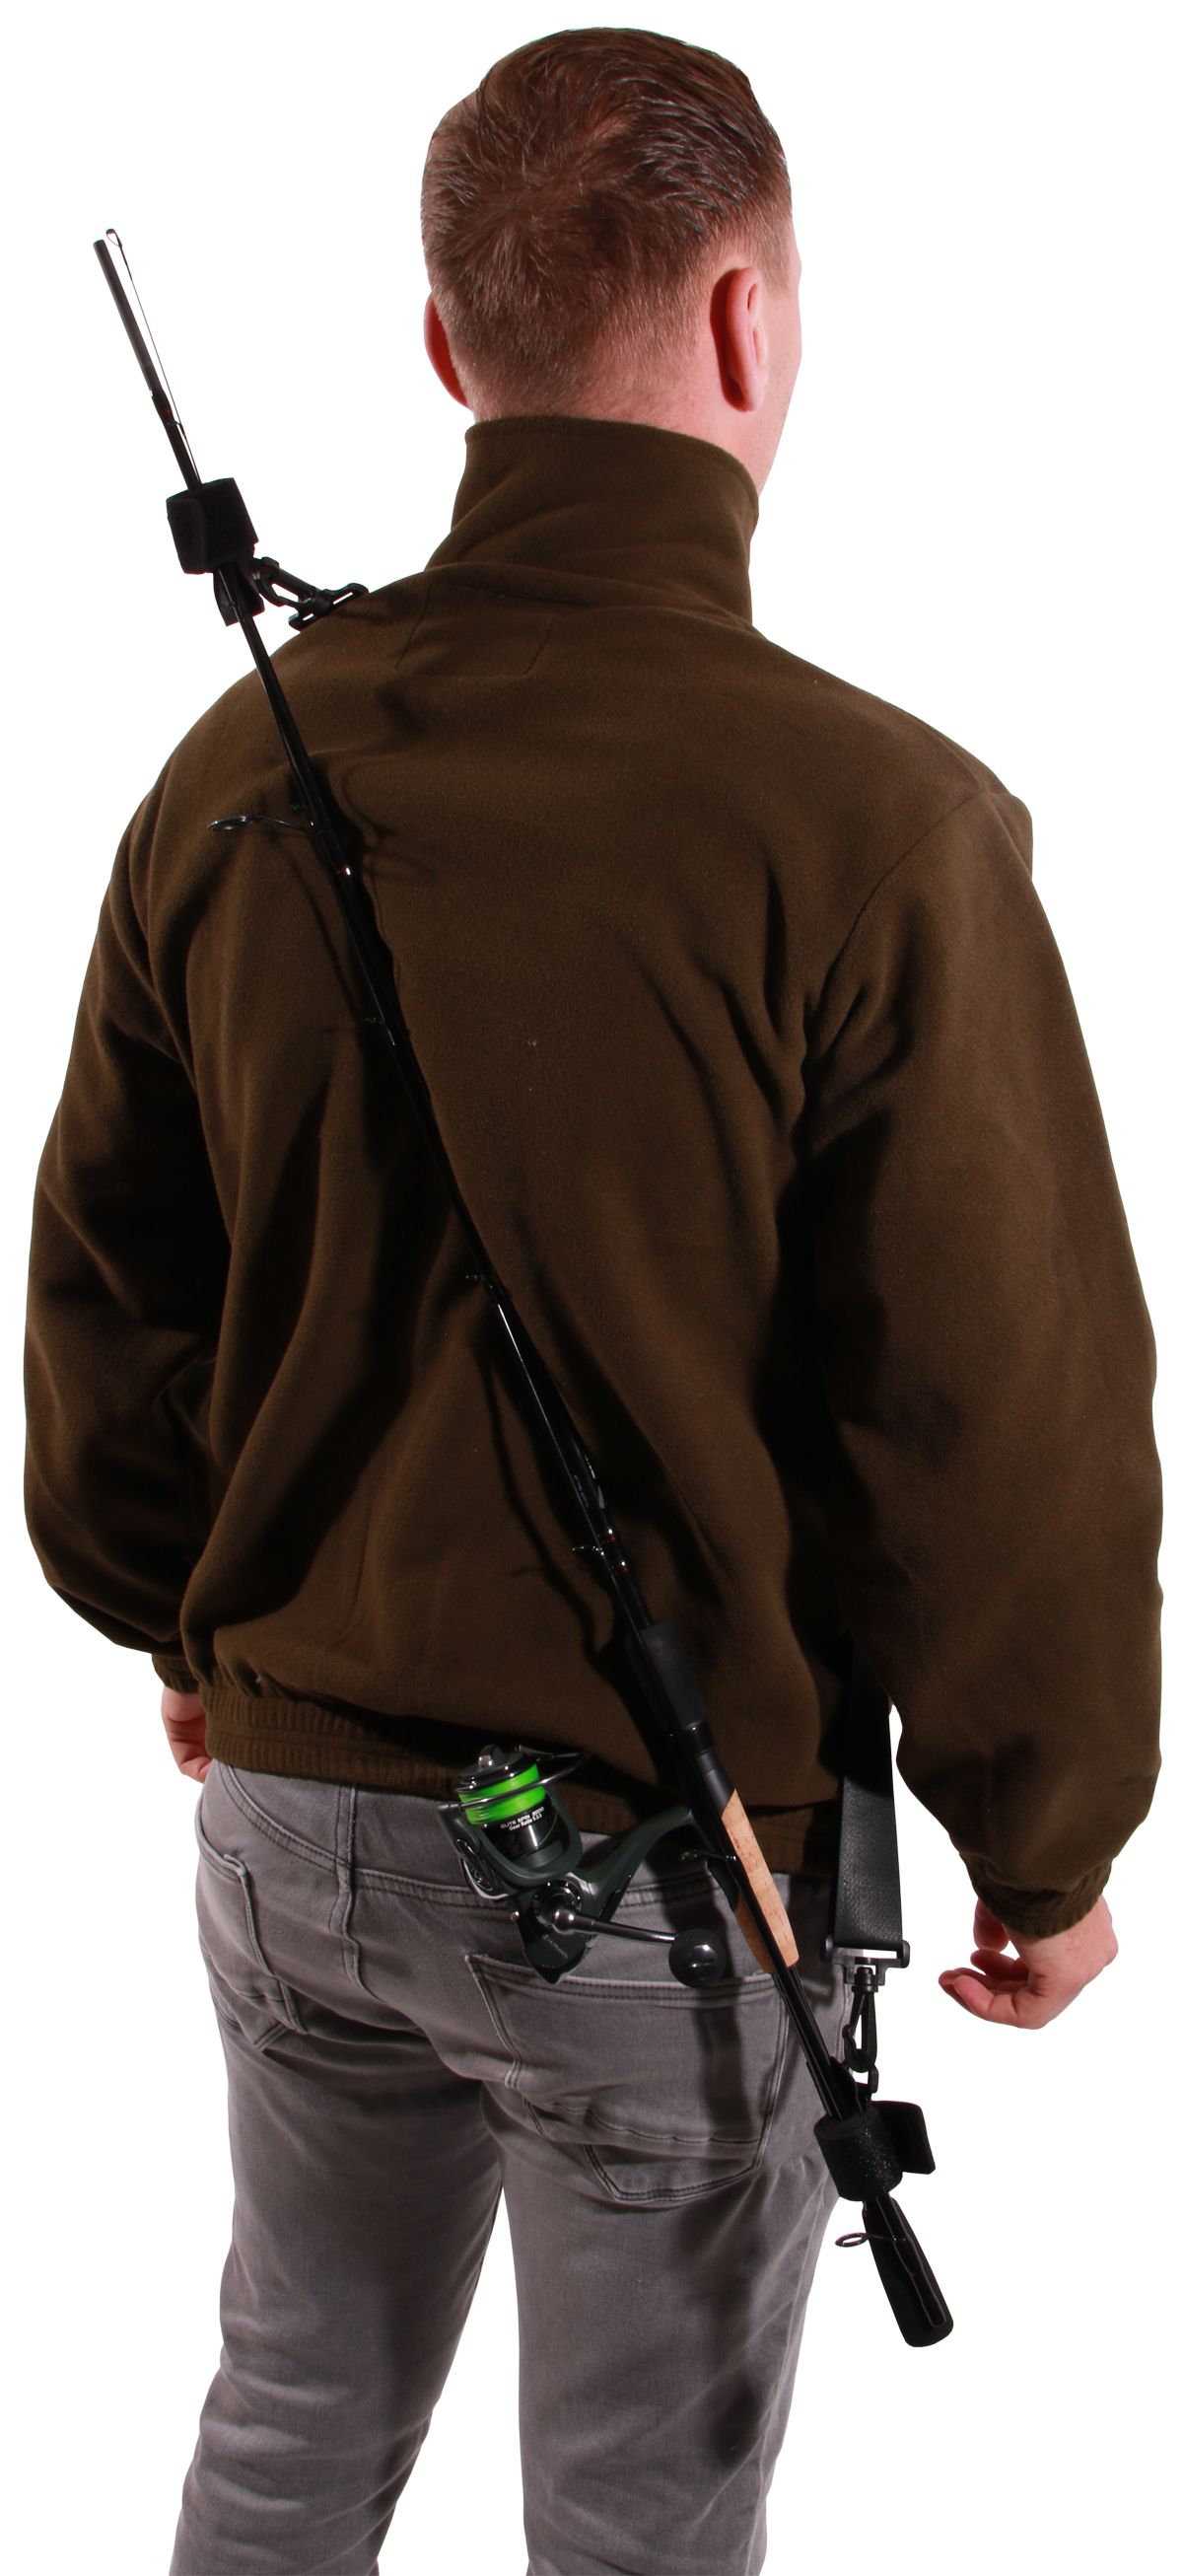 Ultimate Deluxe Rod Carry Strap